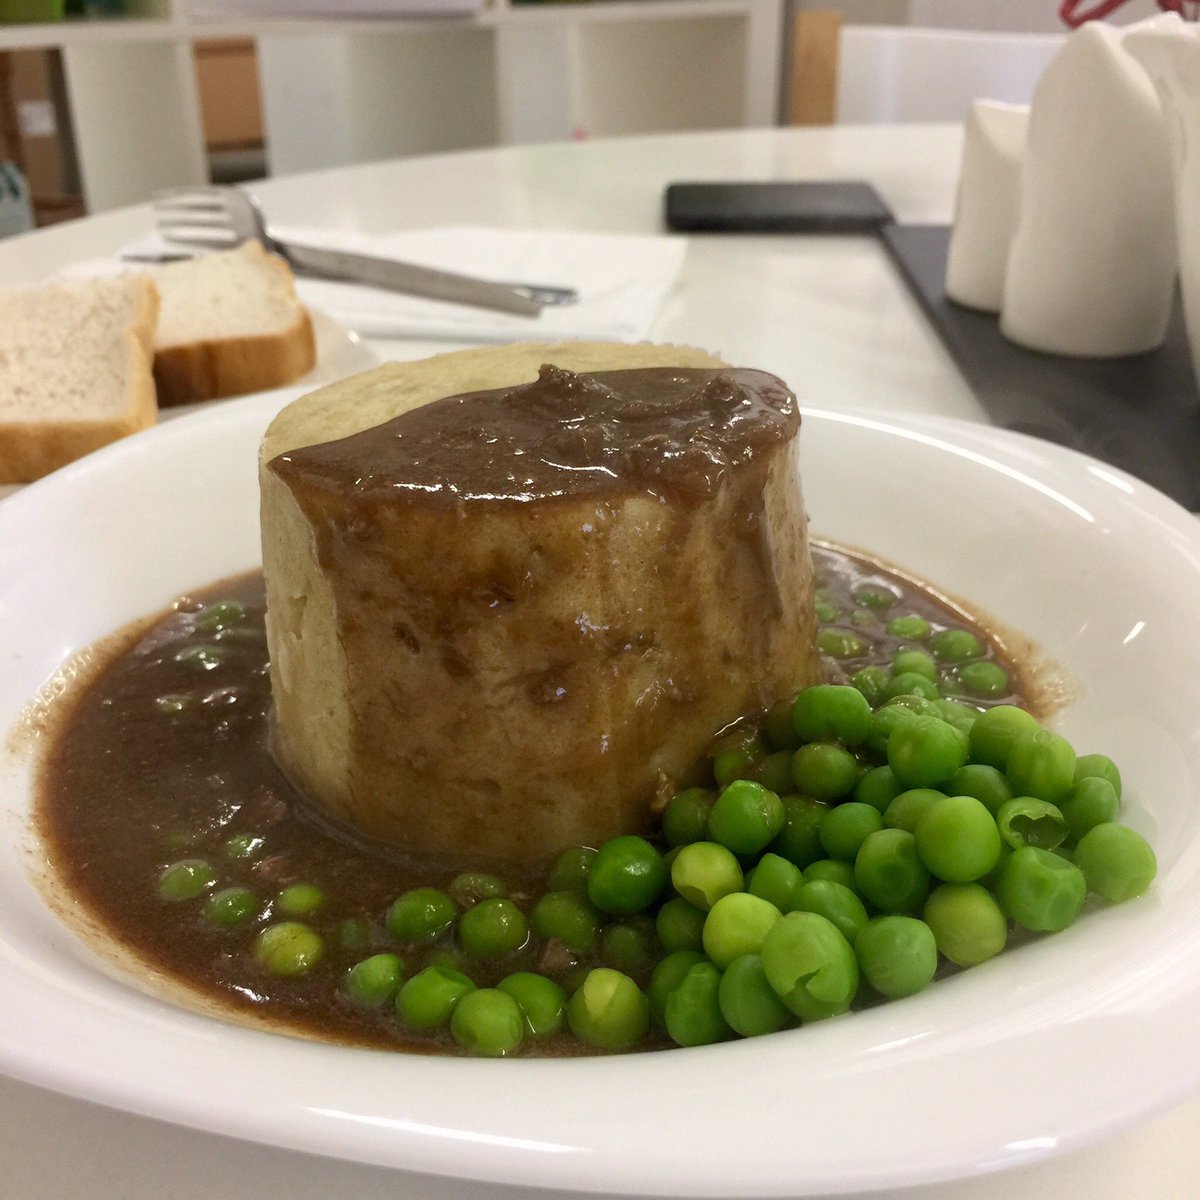 Family owned Traditional Pudding makers using original recipes for Suet Steak Puddings, Christmas Puddings and Steamed sweet Puddings GIFT PACKS OF PUDDINGS #brumhour #worcestershirehour